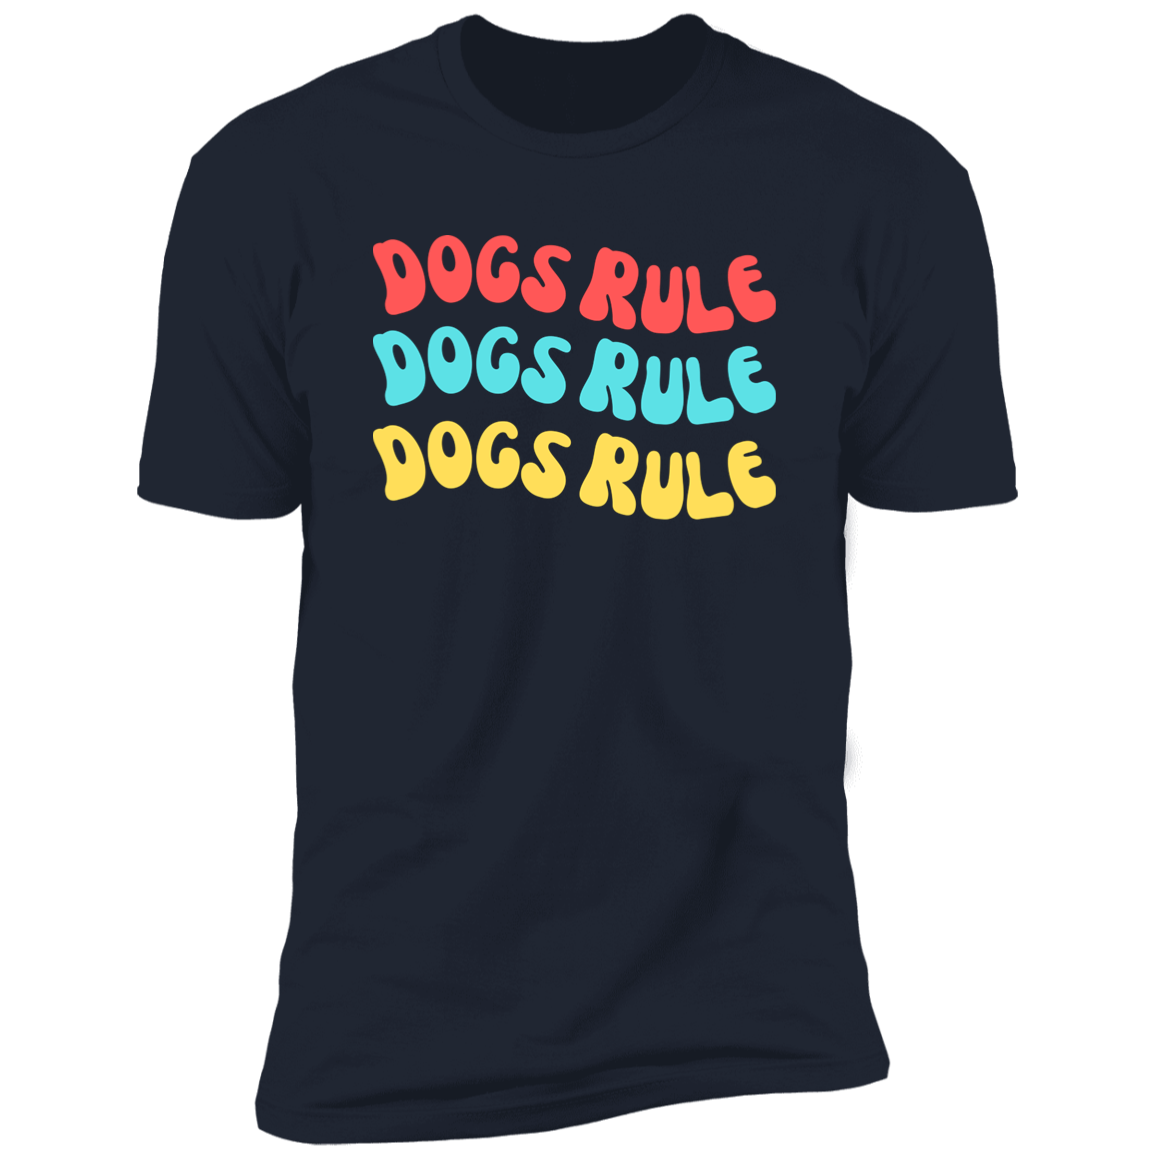 Dogs Rule Dog Shirt, dog shirt for humans, dog mom and dog dad shirt, in navy blue